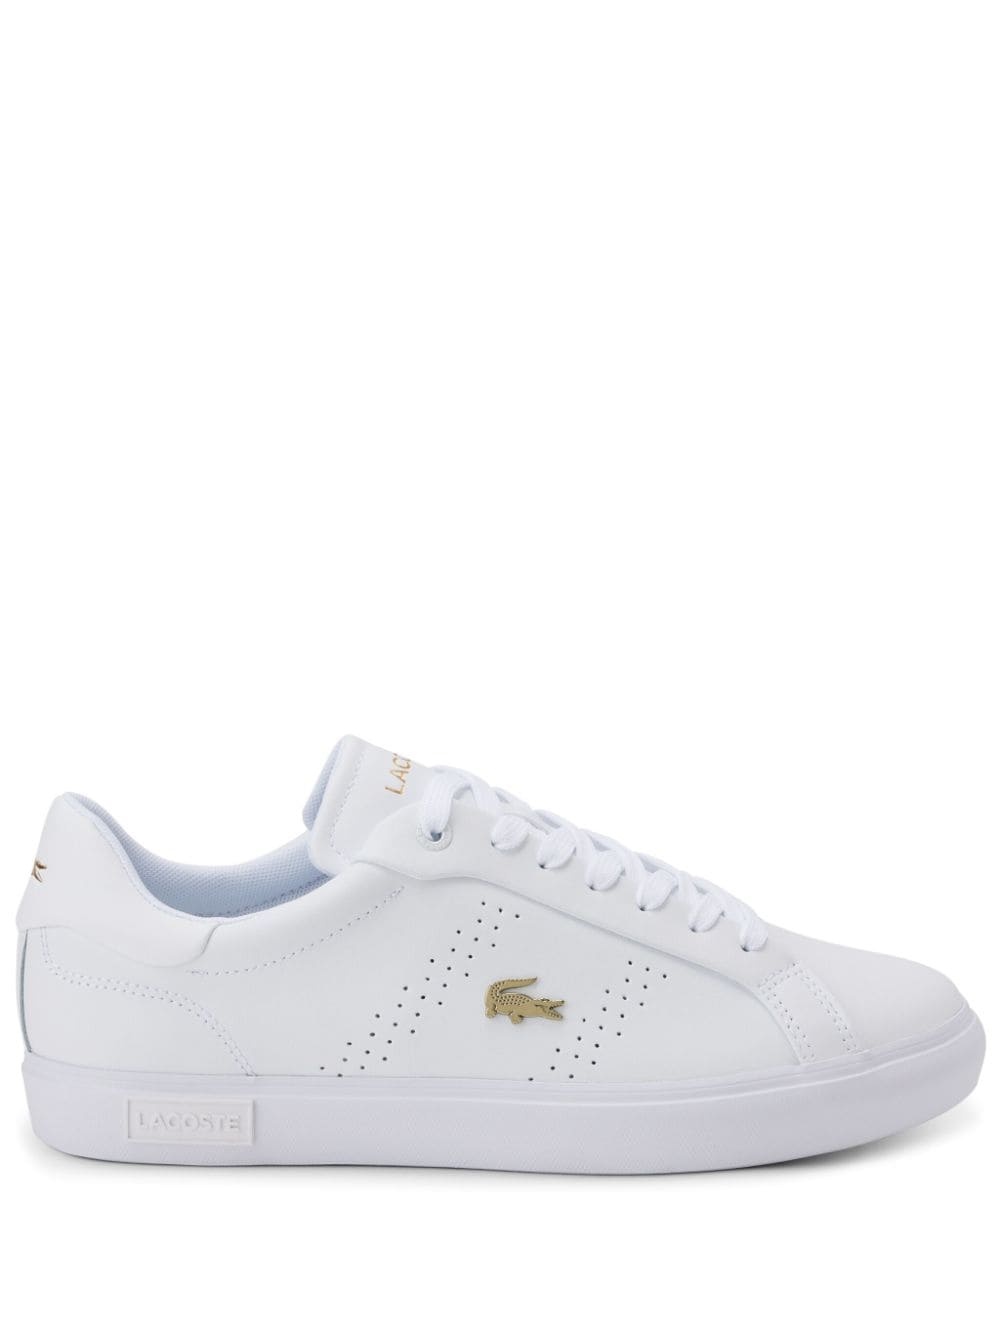 Powercourt 2.0 leather sneakers - 1